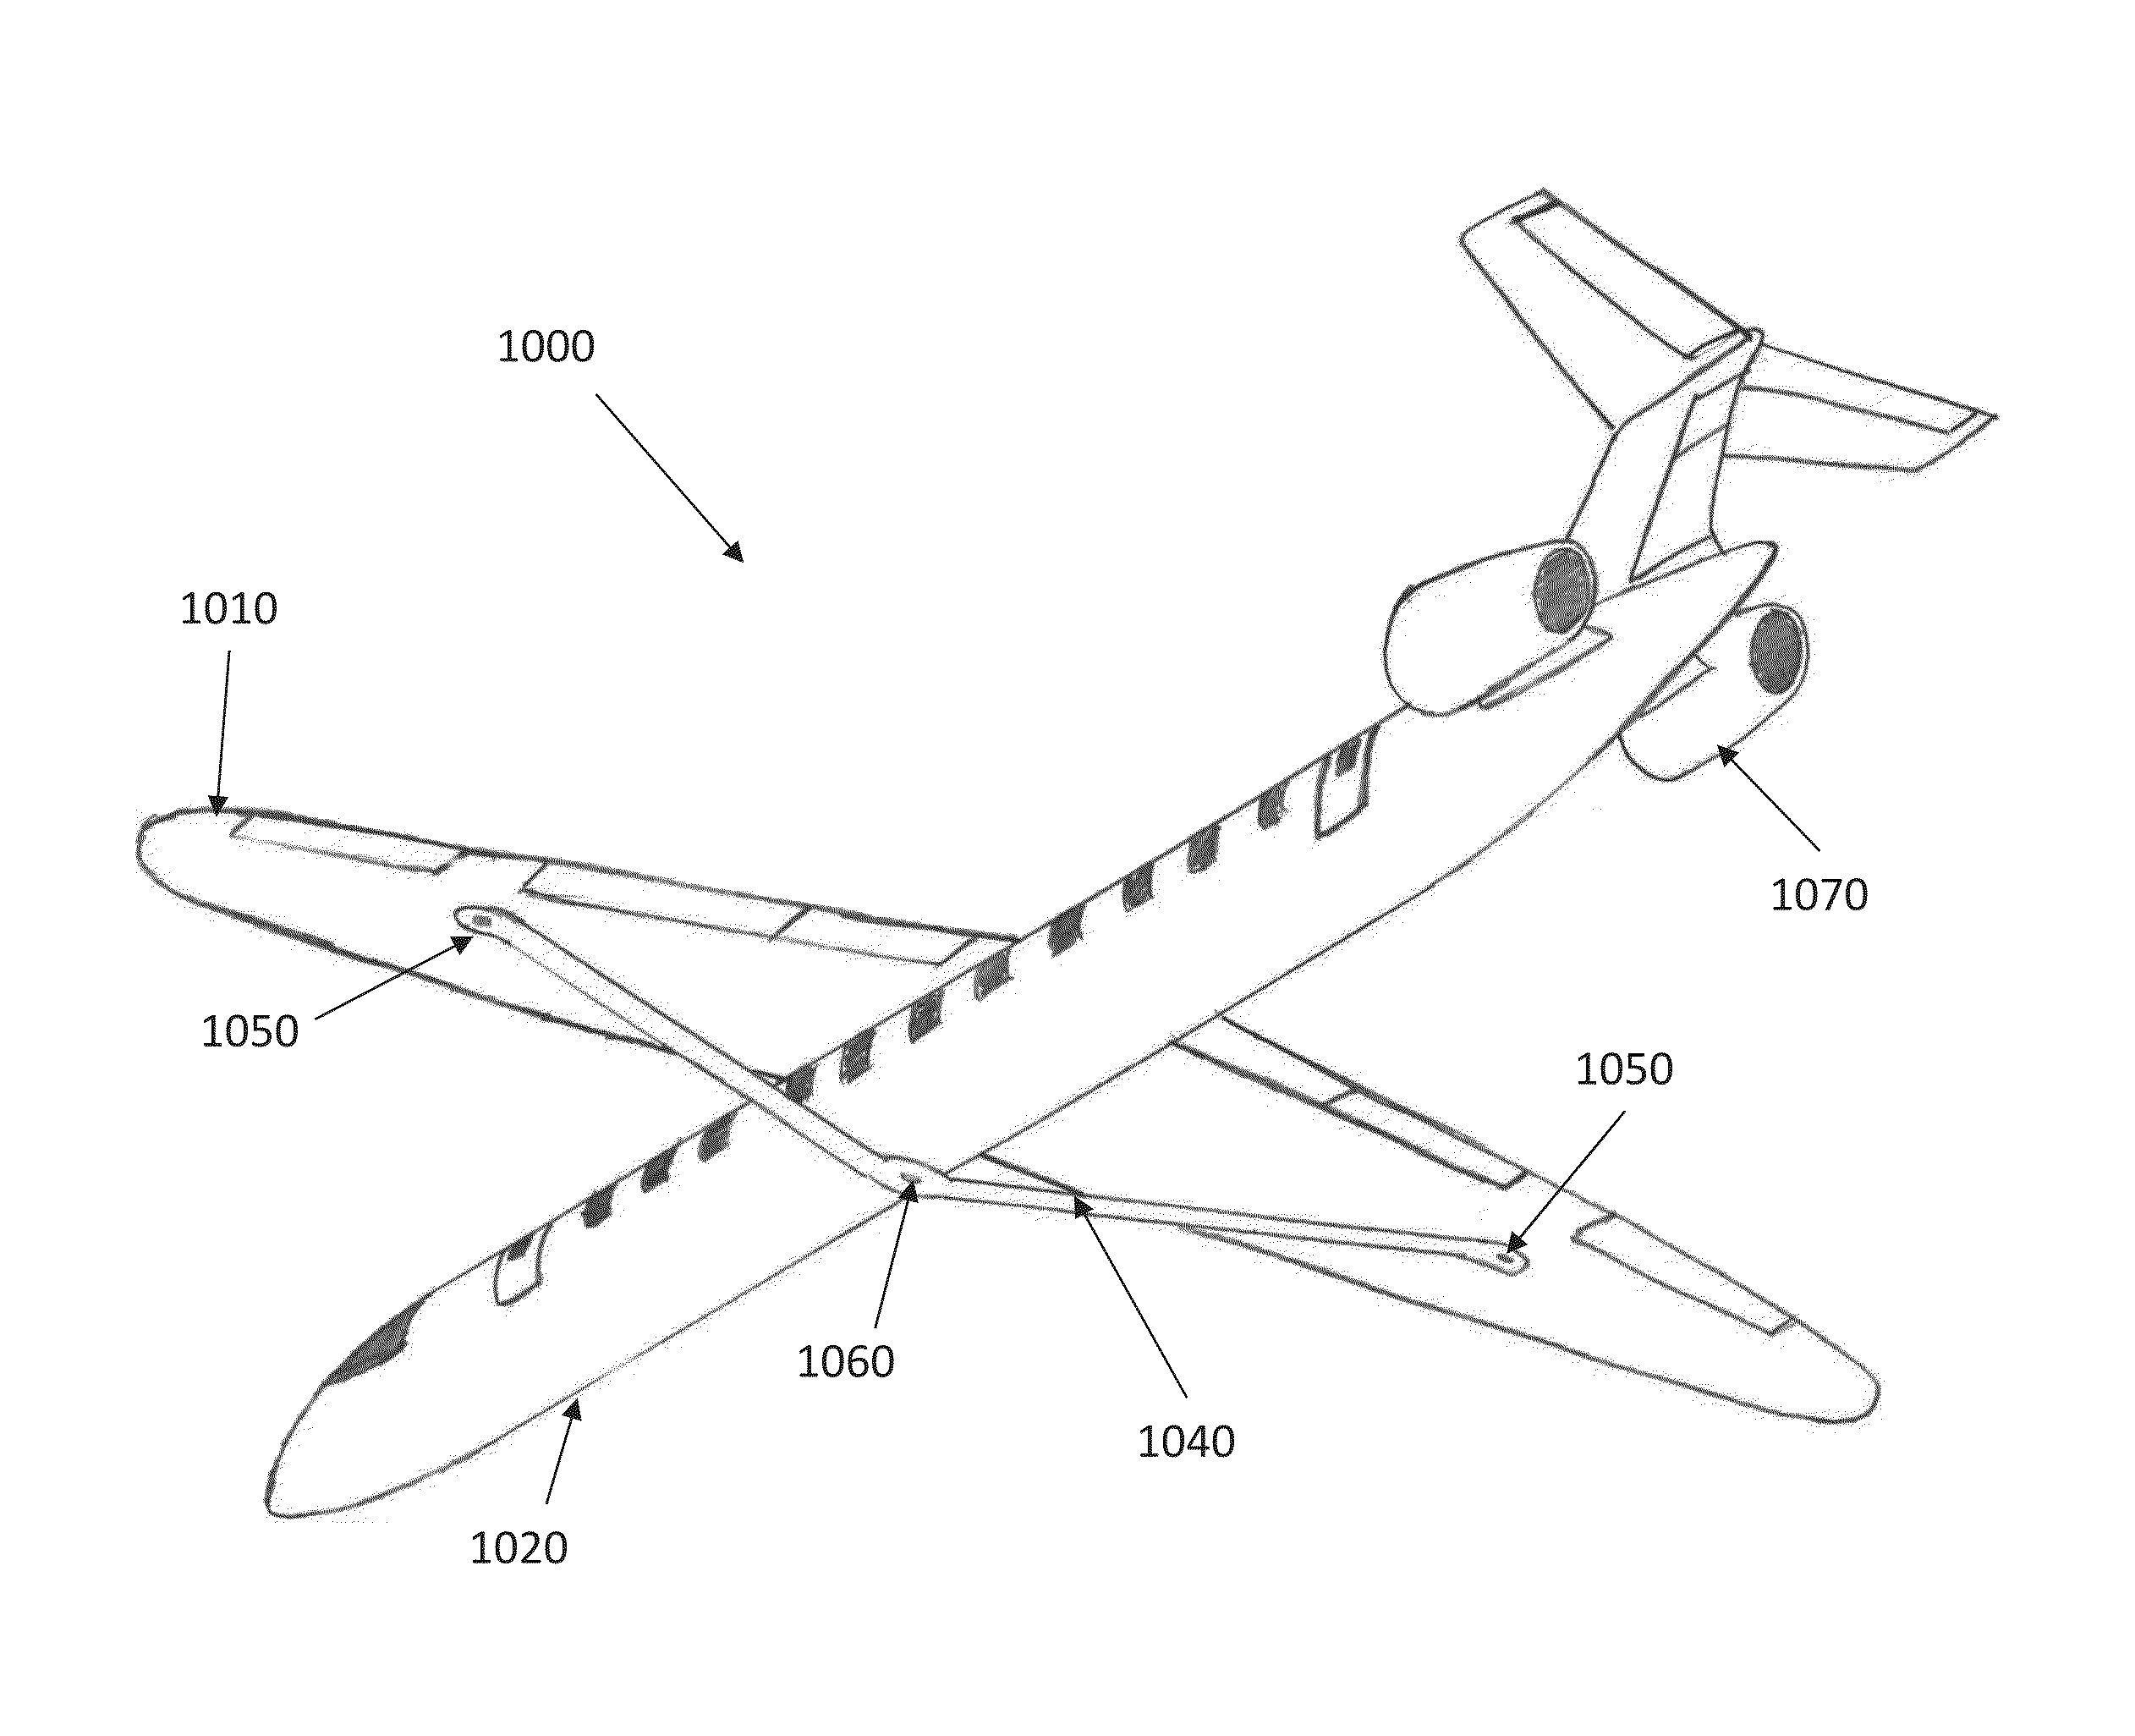 Variable geometry aircraft wing supported by struts and/or trusses